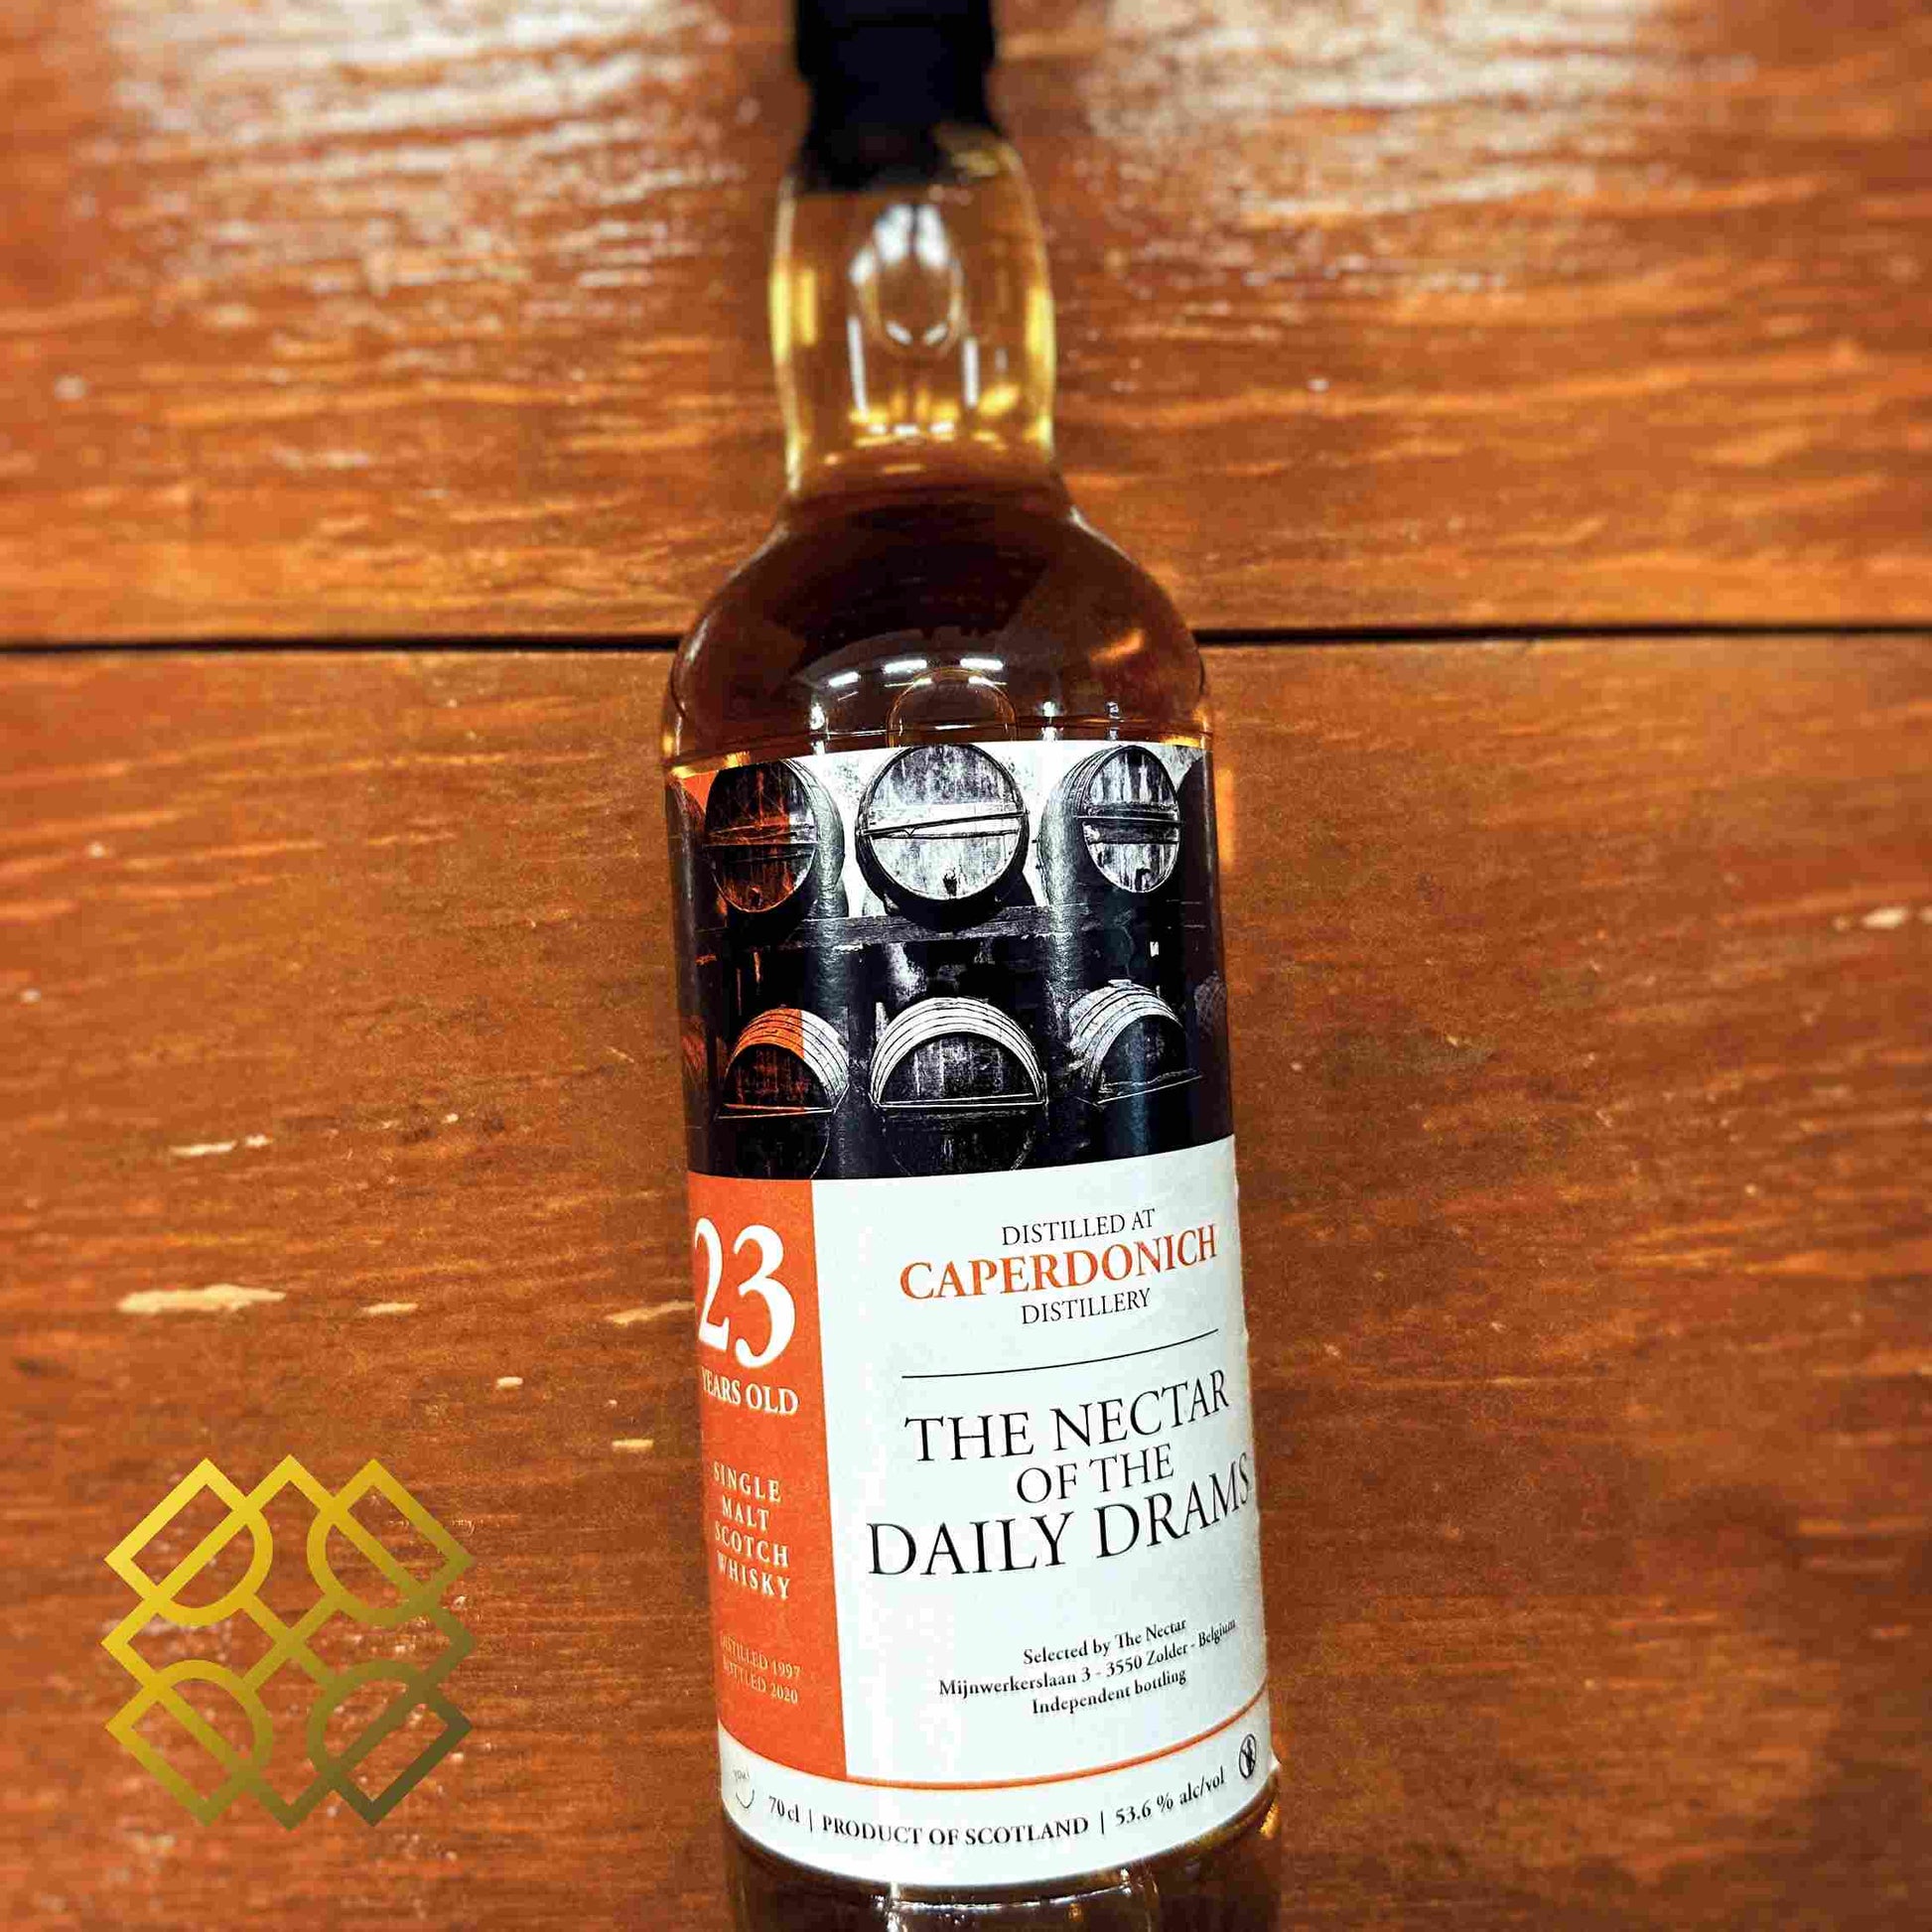 TheNectar of the DailyDrams Caperdonich-23YO, 53.6%-Whisky